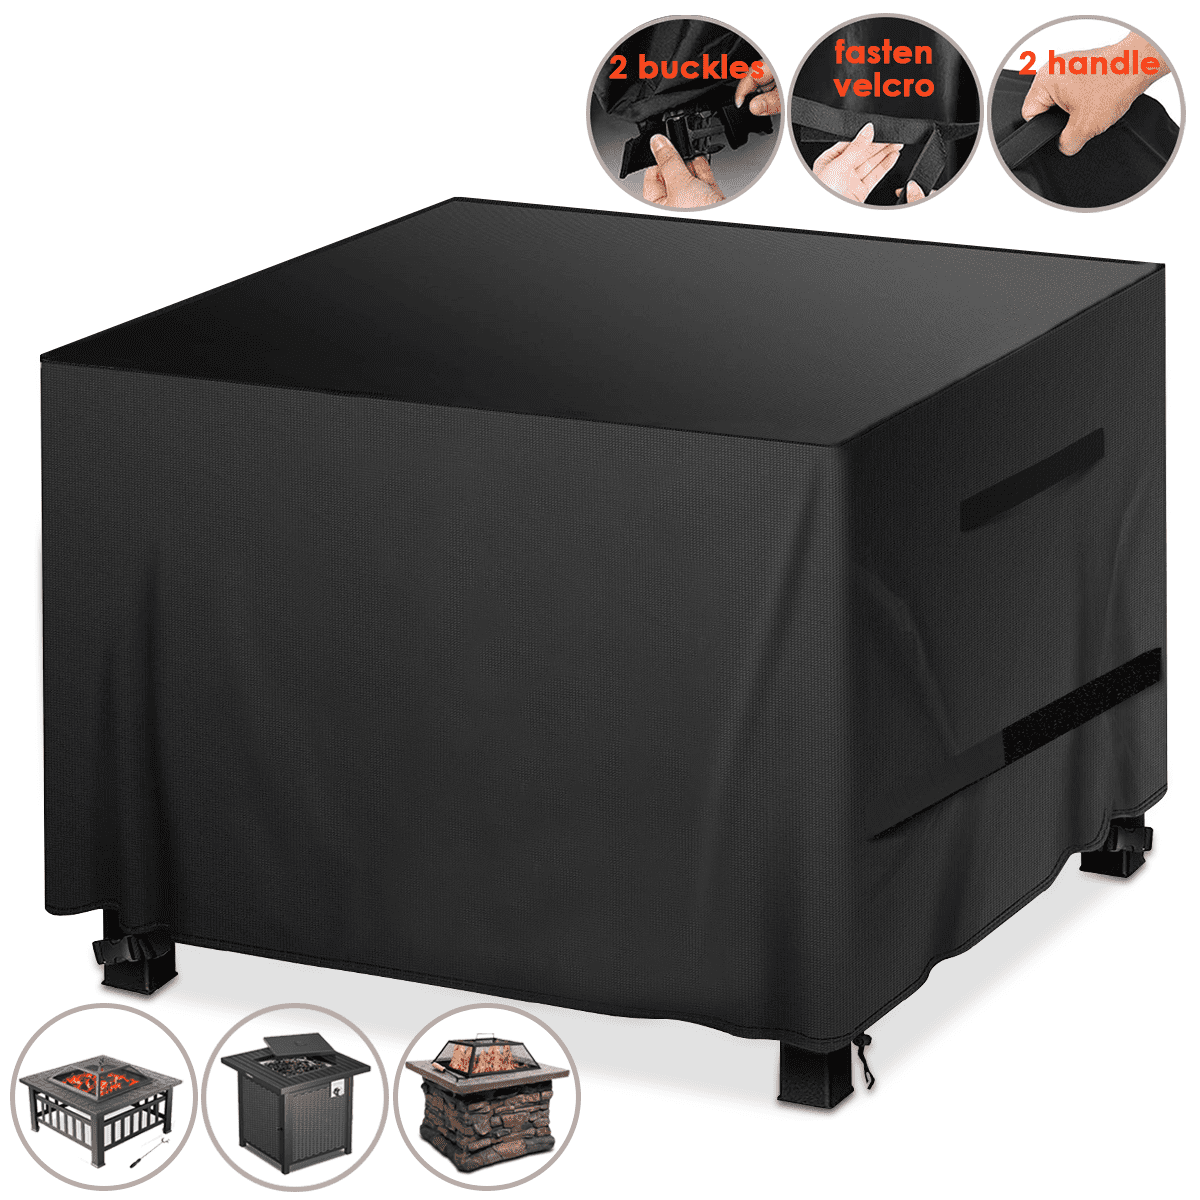 18 Month Warranty95x 92x 50 cm SIRUITON Cooler Cart Cover Oxford Polyester Outdoor Waterproof Cooler Cover Black